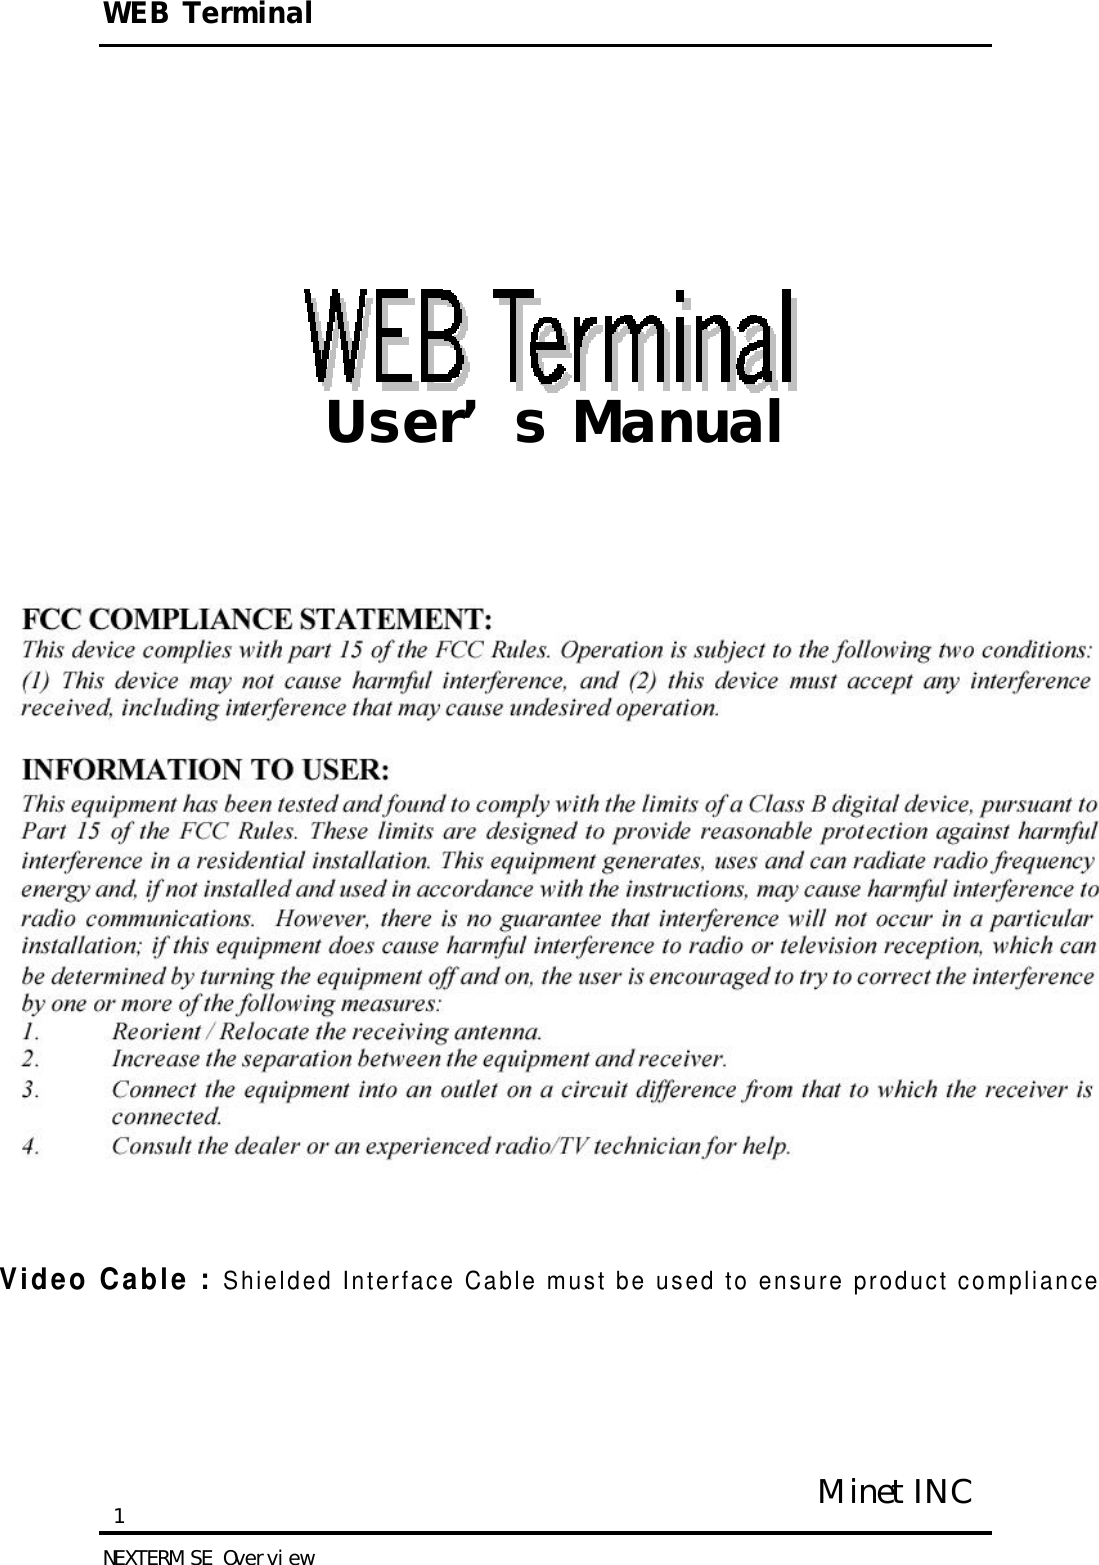 WEB Terminal NEXTERM SE Overview 1Minet INC      User’s Manual            Video Cable : Shielded Interface Cable must be used to ensure product compliance 